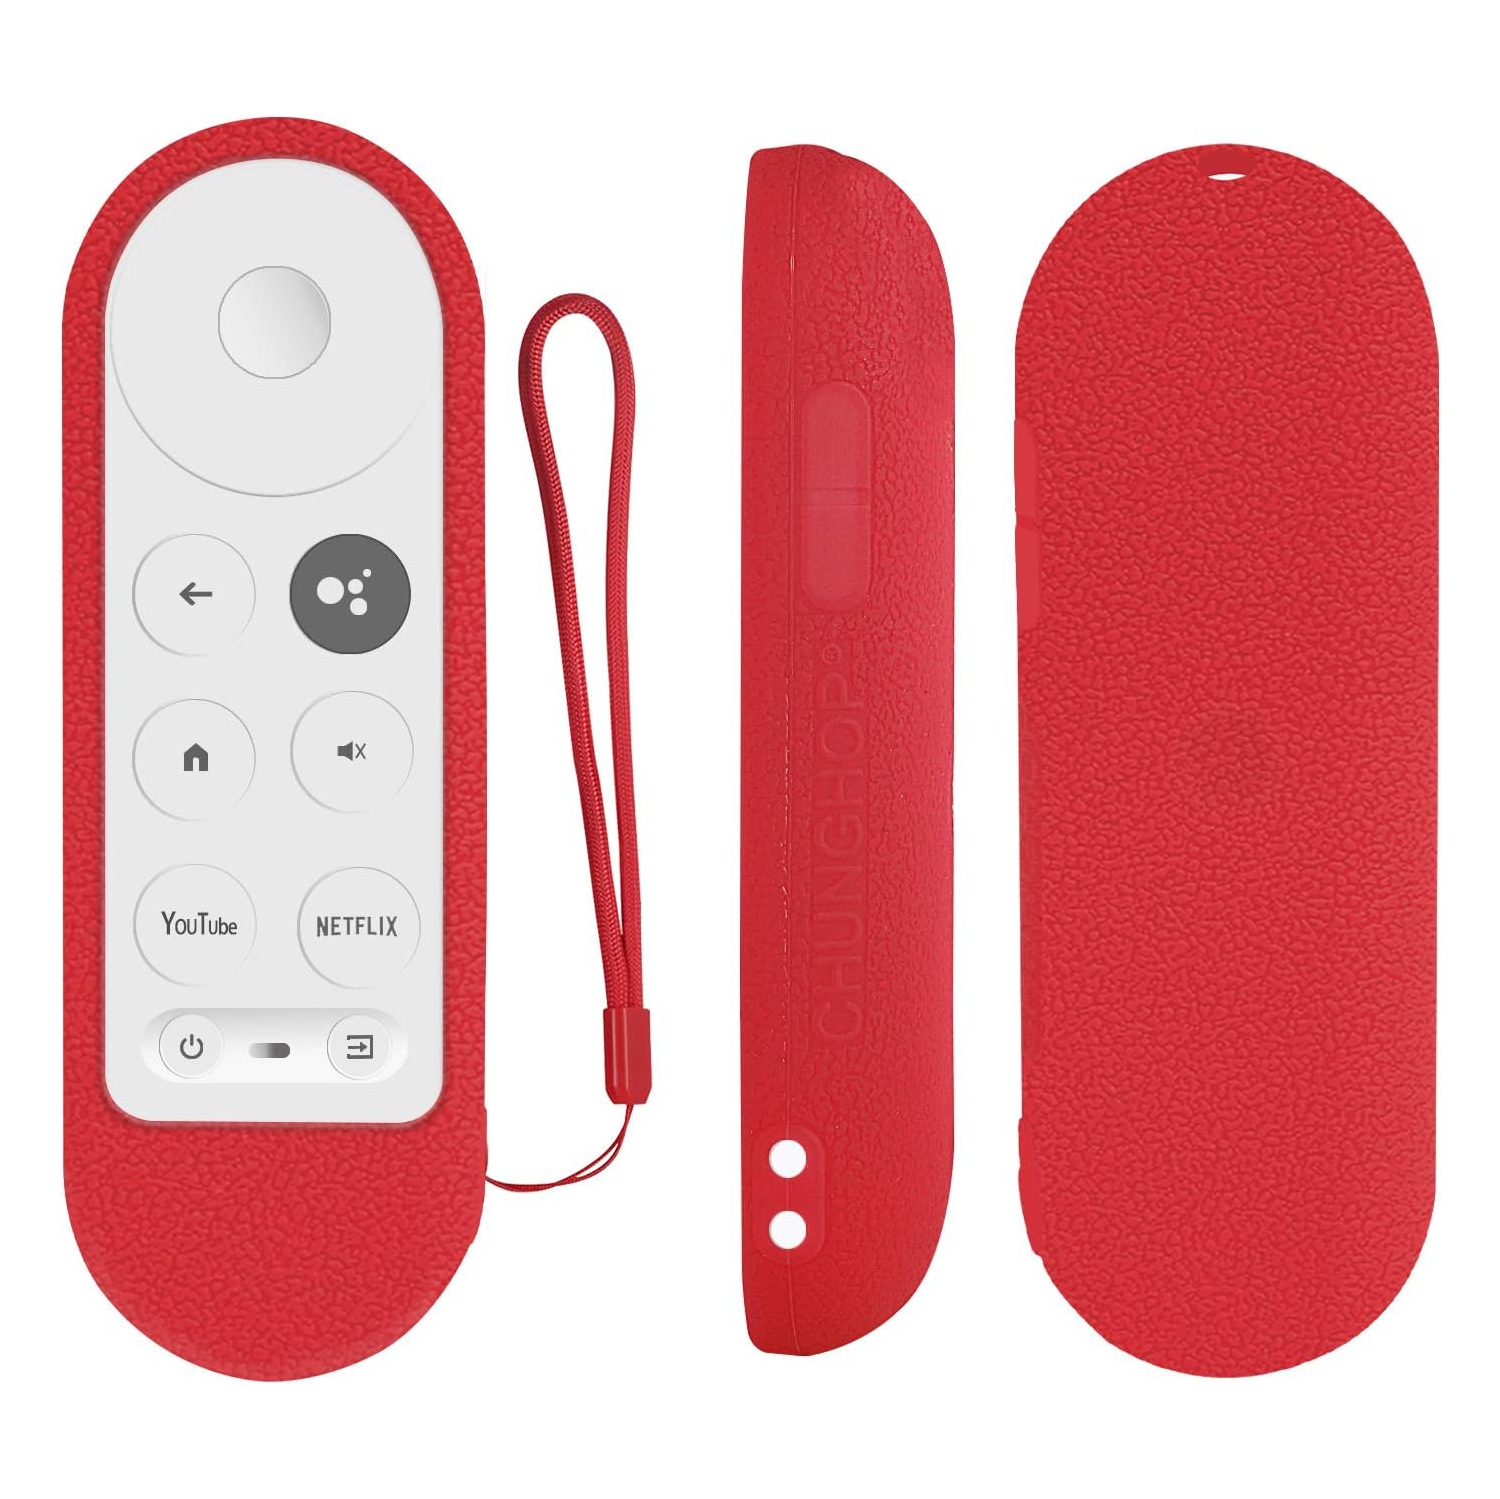 Protective Silicone Remote Case for Chromecast with Google TV 2020 Voice Remote Control, Skin-Friendly Protective Cover